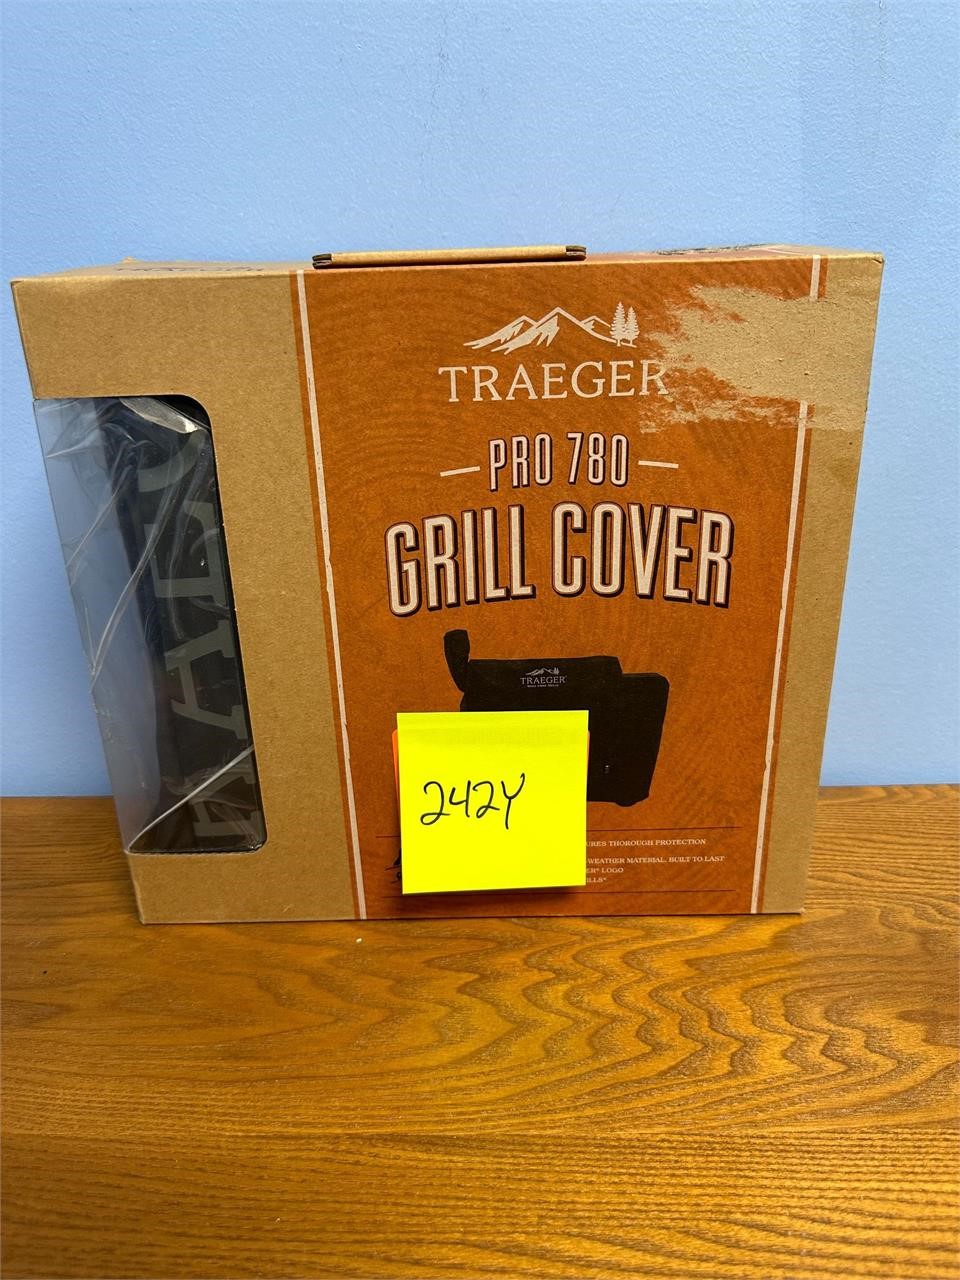 TRAEGER Pro 780 Grill Cover